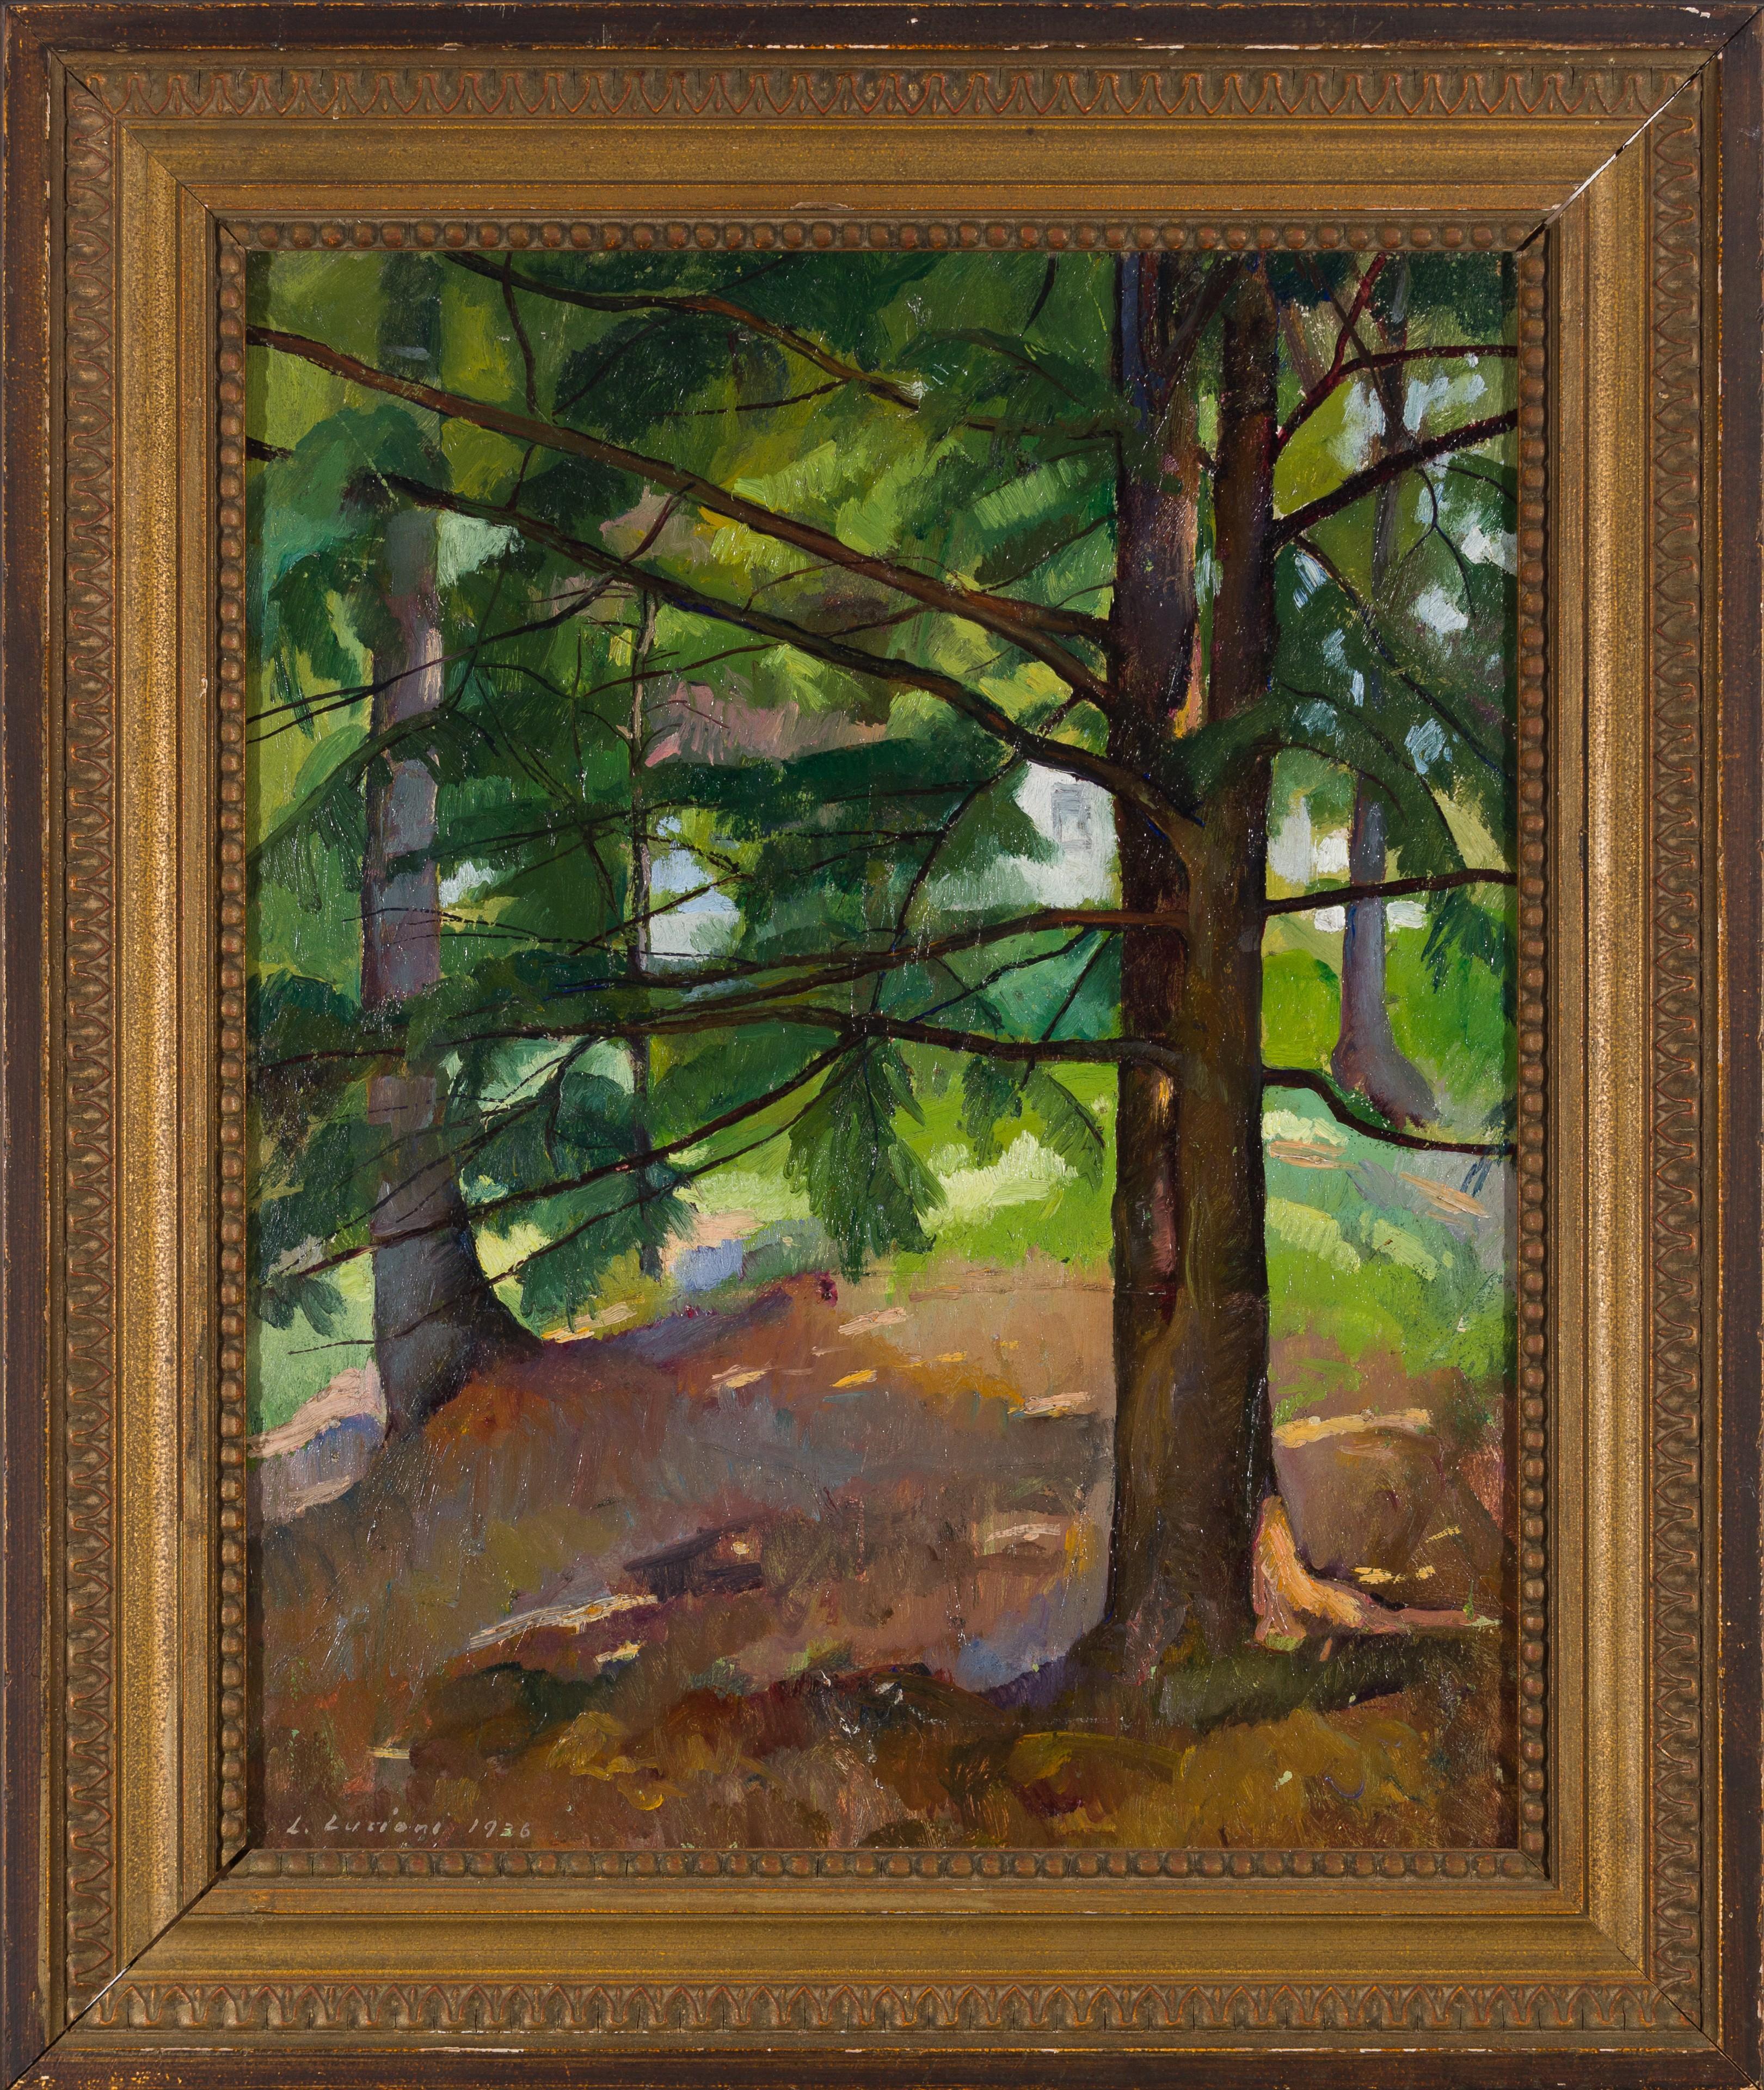 Luigi Lucioni
Vermont Landscape with Birch Trees, 1936
Signed and dated lower left and inscribed indistinctly verso
Oil on board
20 x 15 7/8 inches

Provenance:
James D. Julia, August 20, 2003, Lot 1396
Private Collection, Rye Beach, New